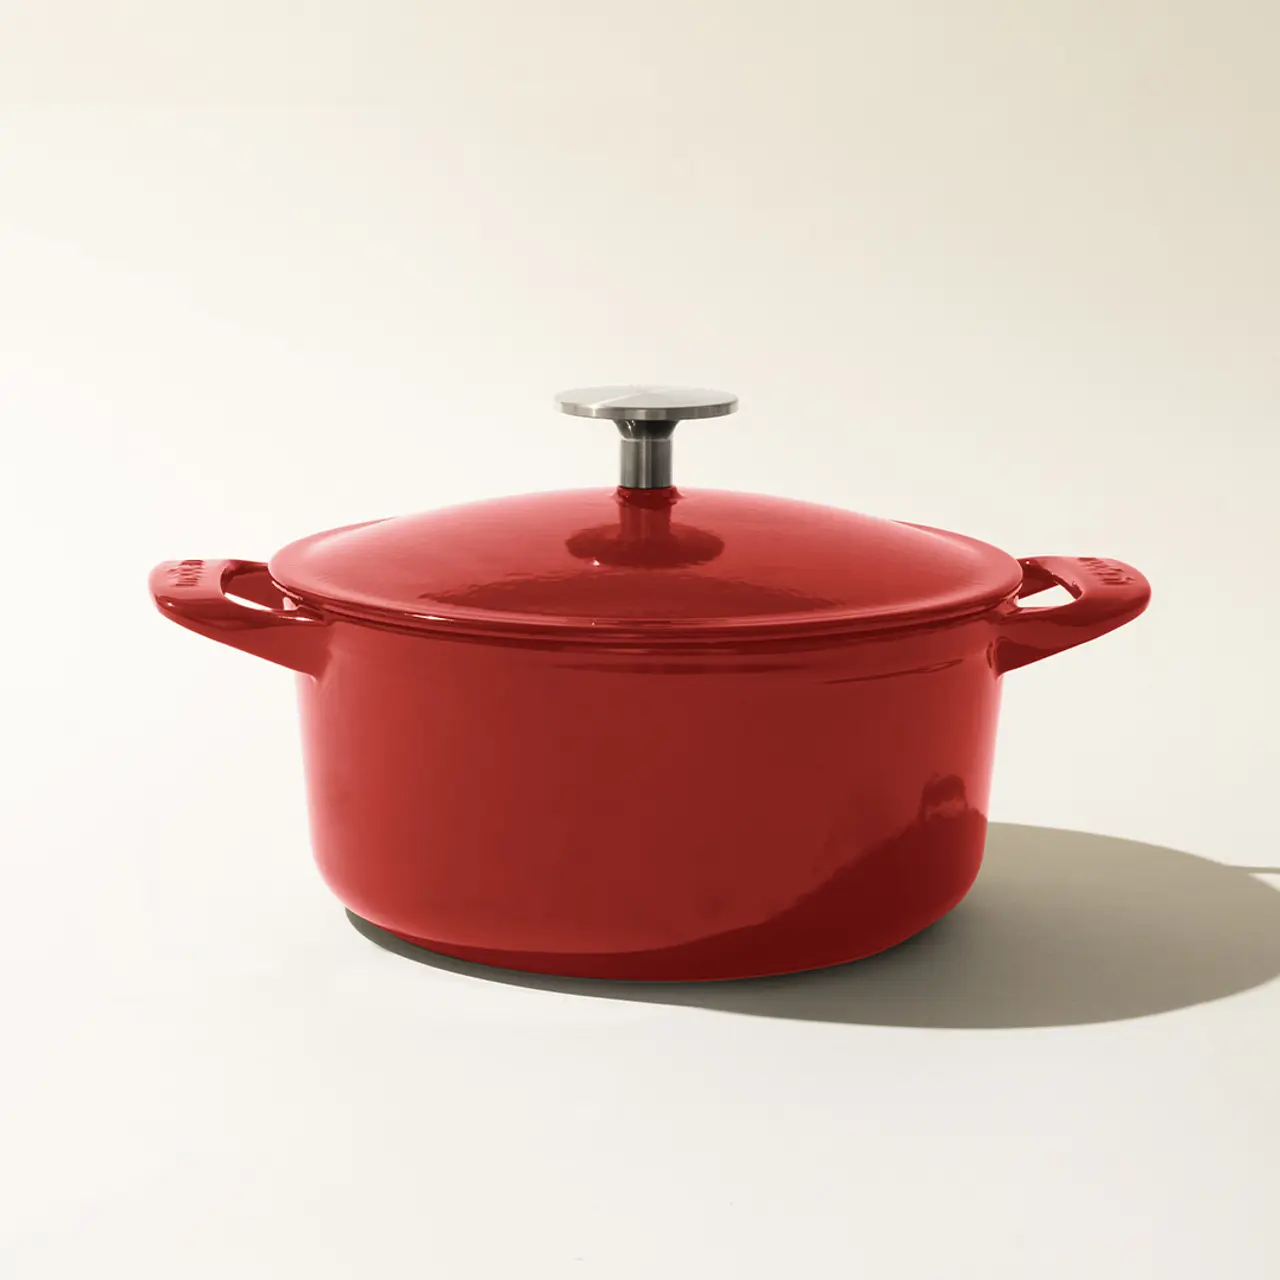 A red enameled cast iron Dutch oven with a lid, placed on a light background.